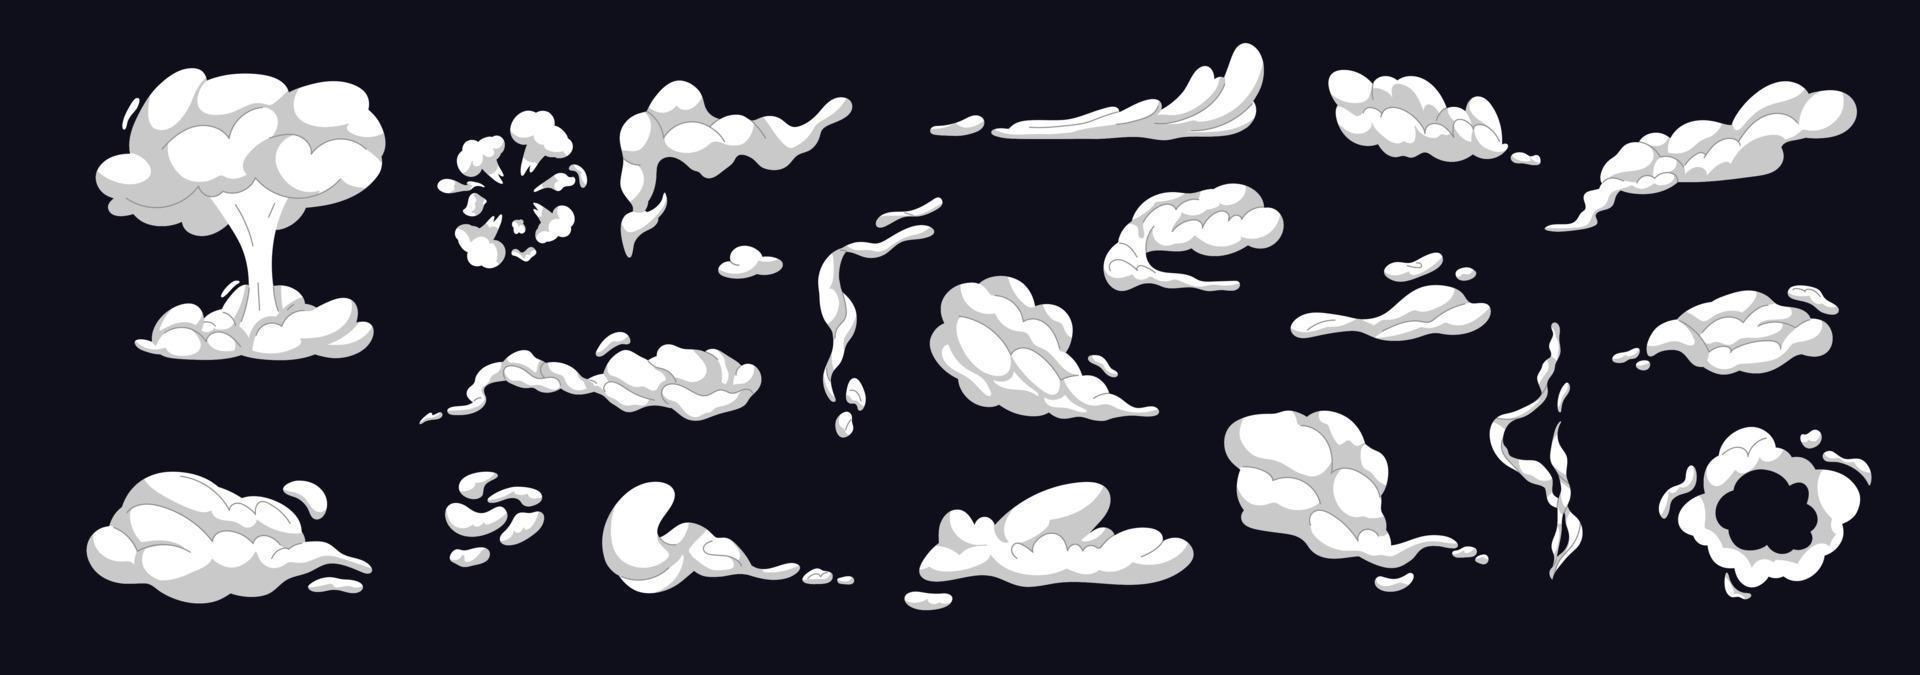 Smoke and dust cloud set. Cartoon smoke clouds. Exploding effect frames set. Collection of isolated icons of air trail, dust, explosion. Smoke explosion sprite elements isolated on black background vector